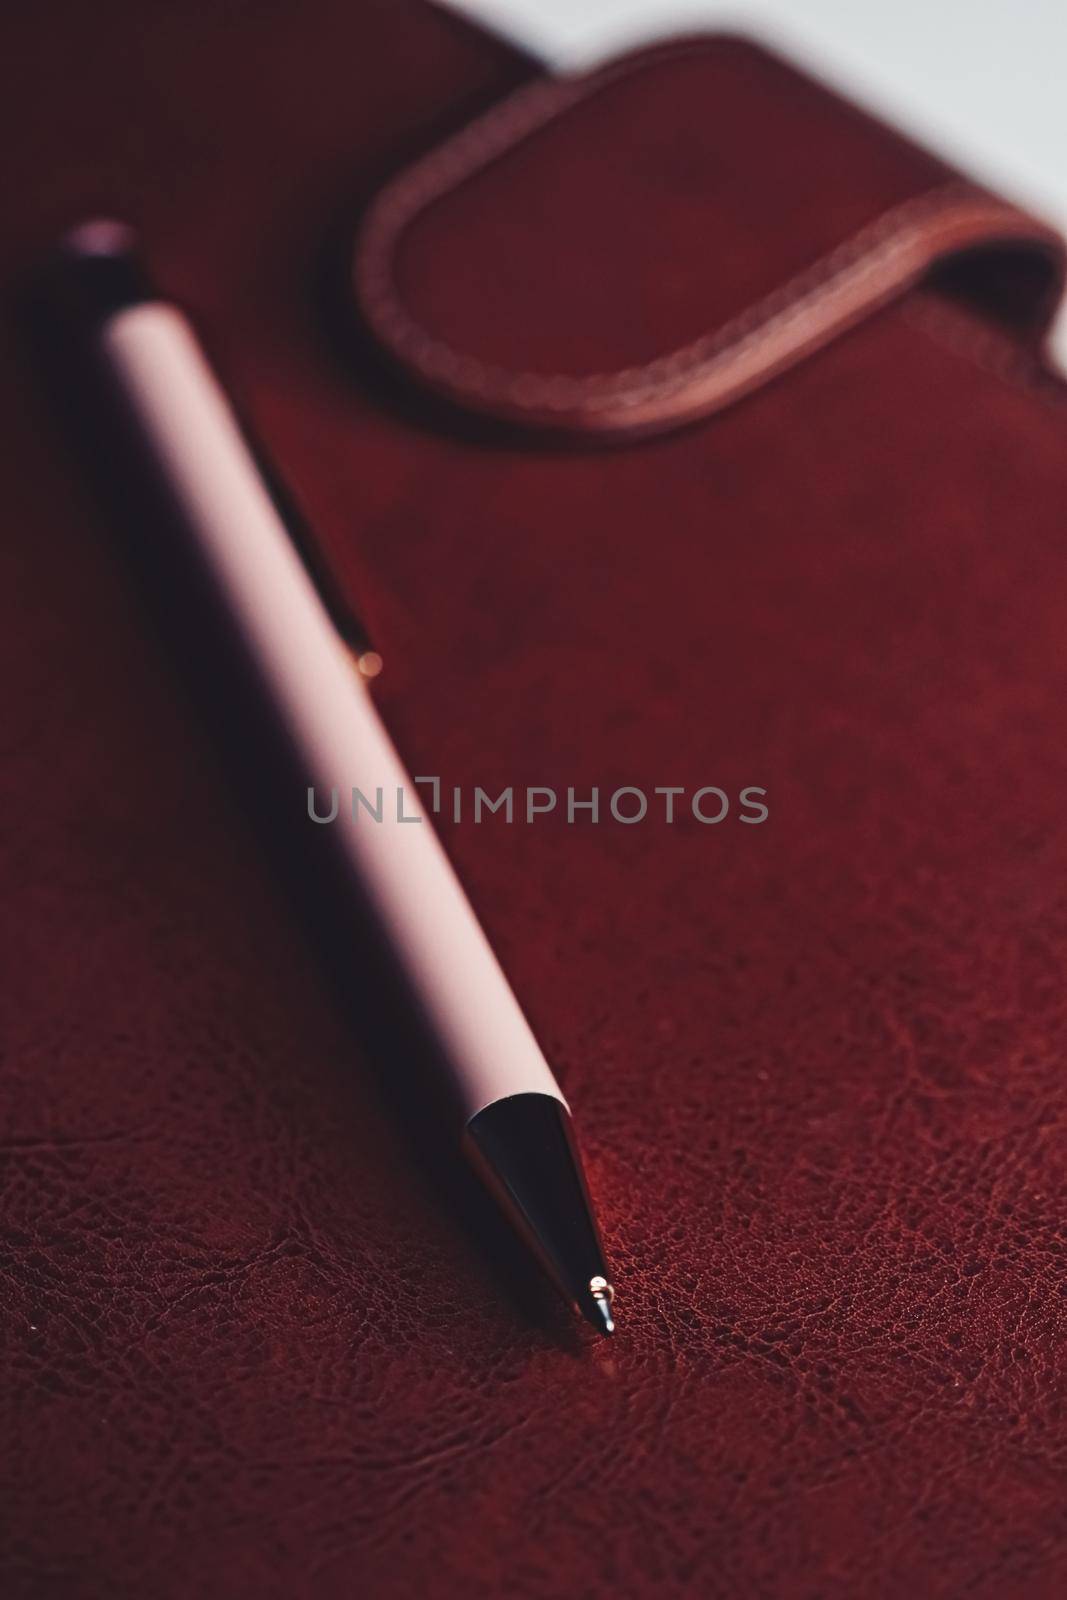 Pen and leather briefcase in office, closeup